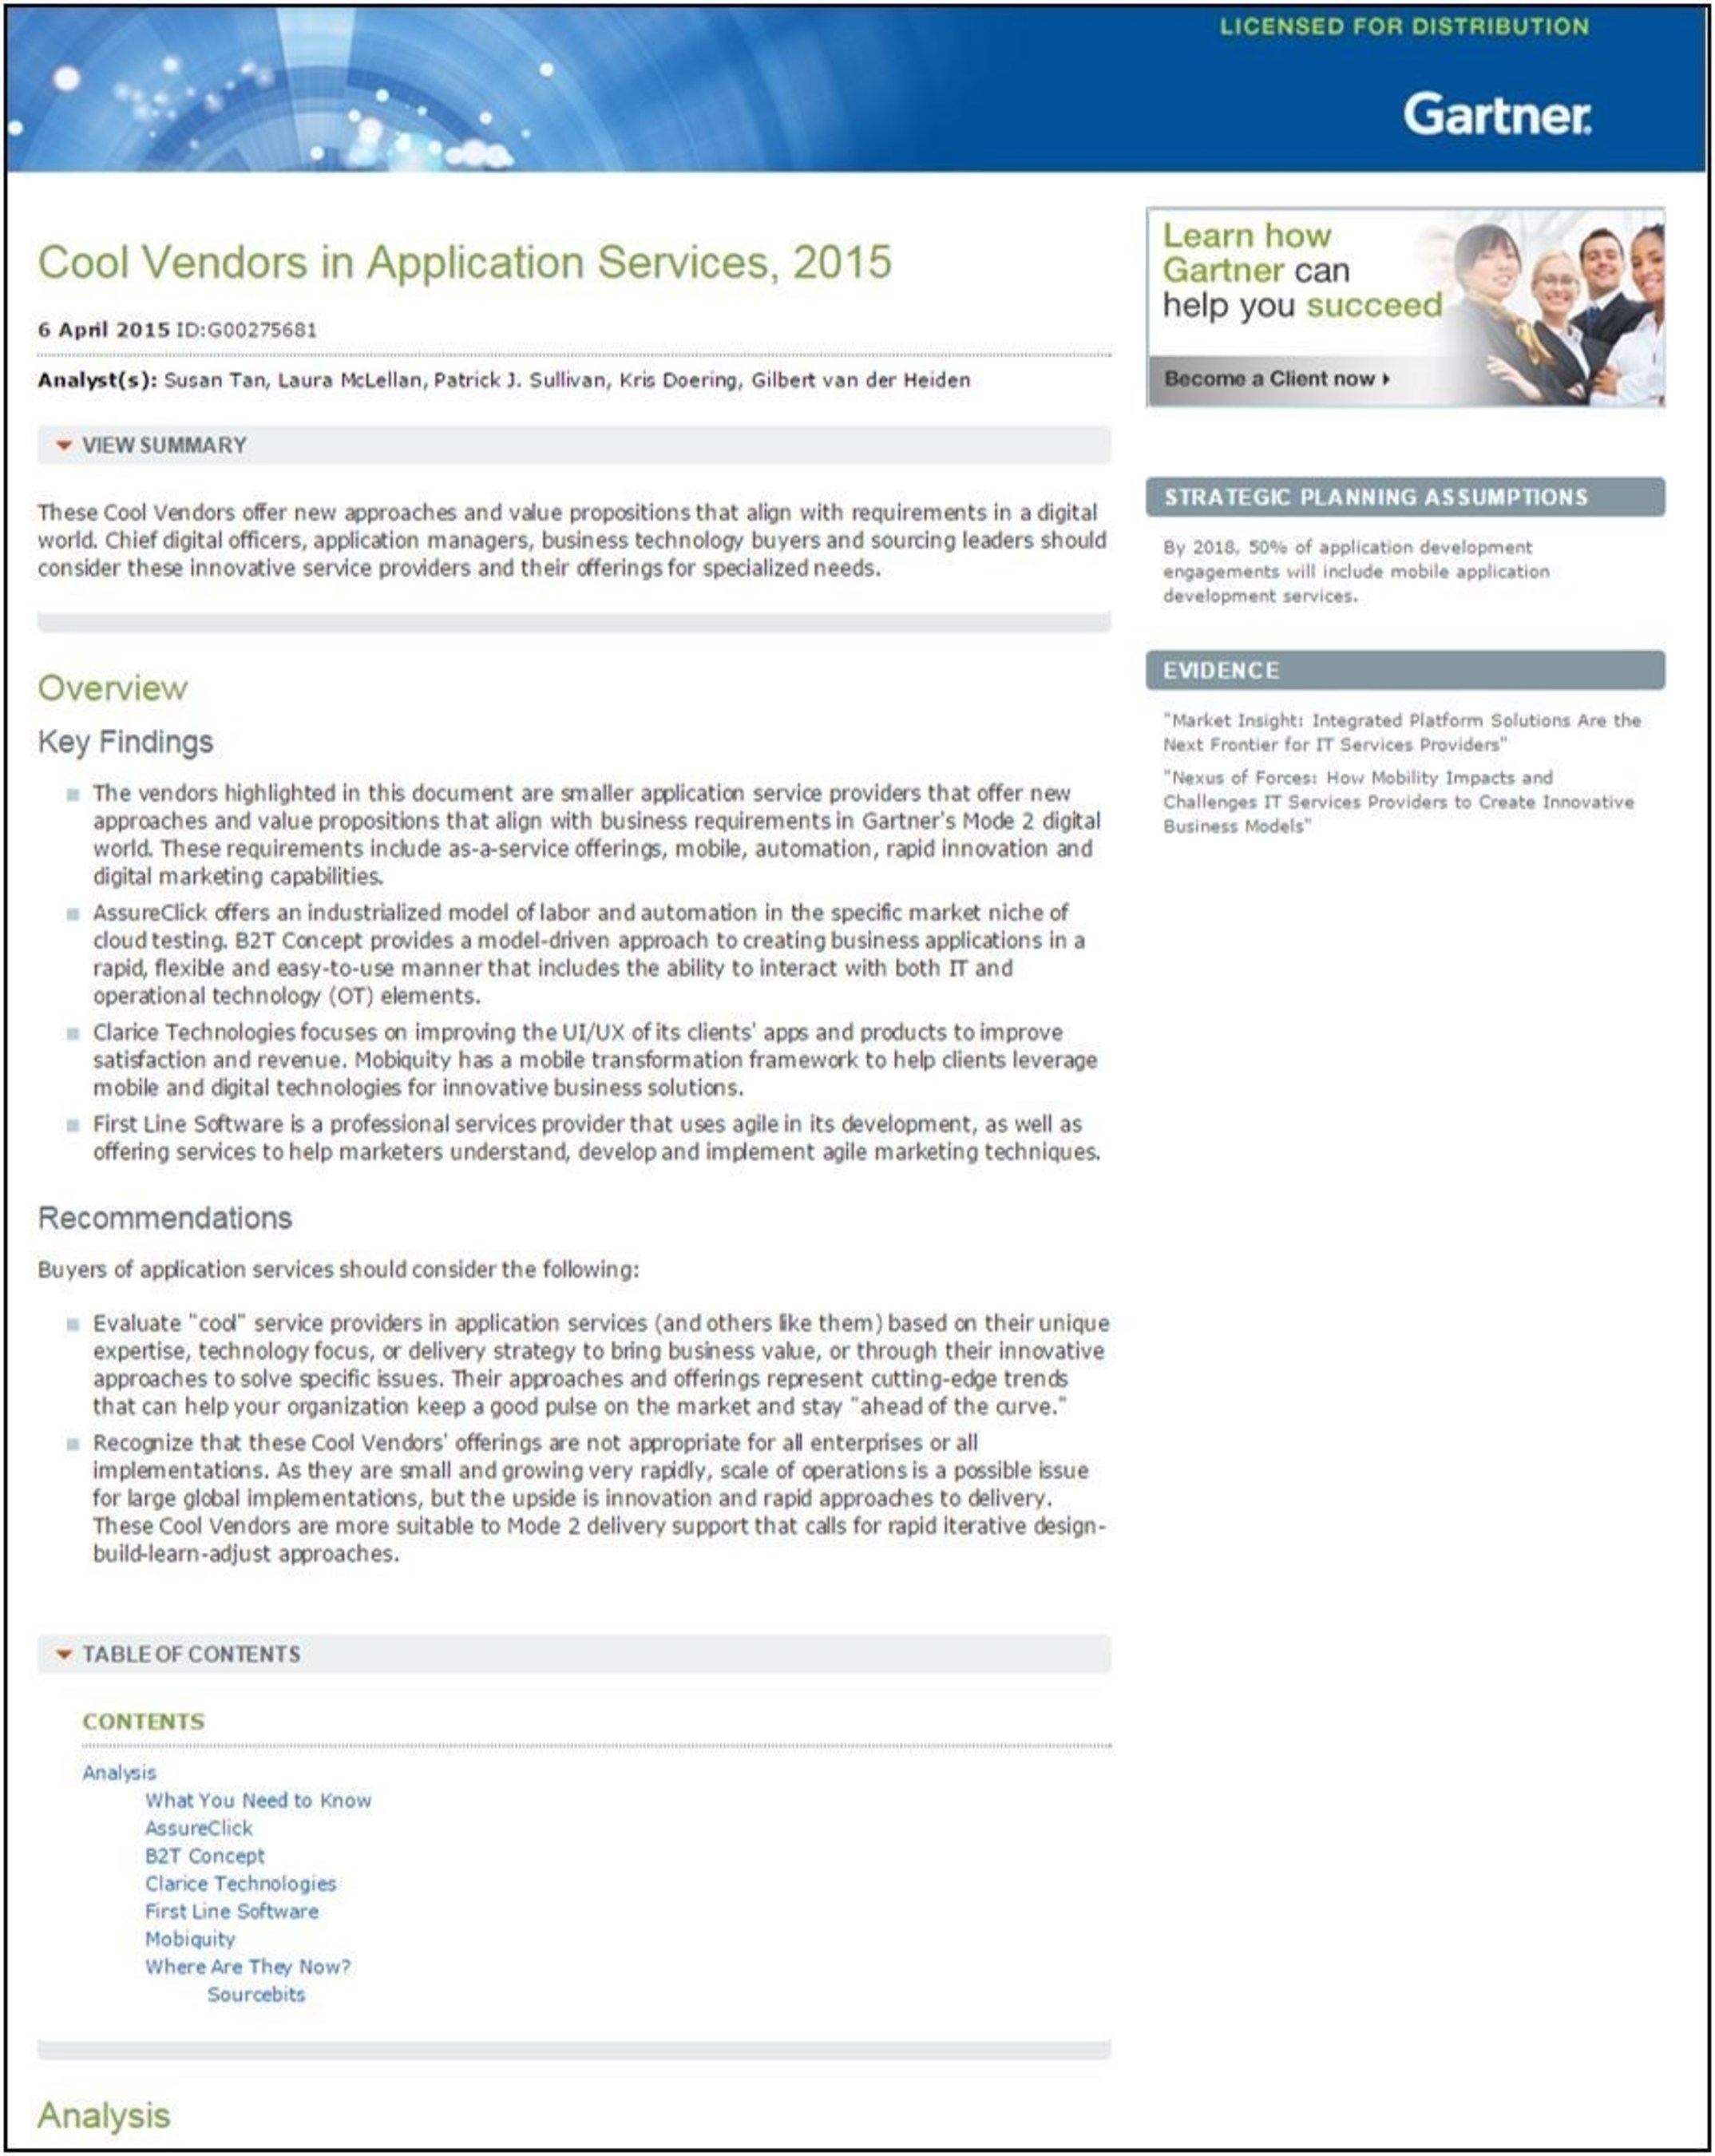 Gartner Cool Vendor App Services 2015.  First Line Software, a leading provider of custom software development and technology enablement services, announced today that it has been listed in Gartner's Cool Vendors in Application Services, 2015 report, published by Susan Tan, Laura McLellan, Patrick J. Sullivan, Kris Doering, Gilbert van der Heiden, on April 6, 2015.